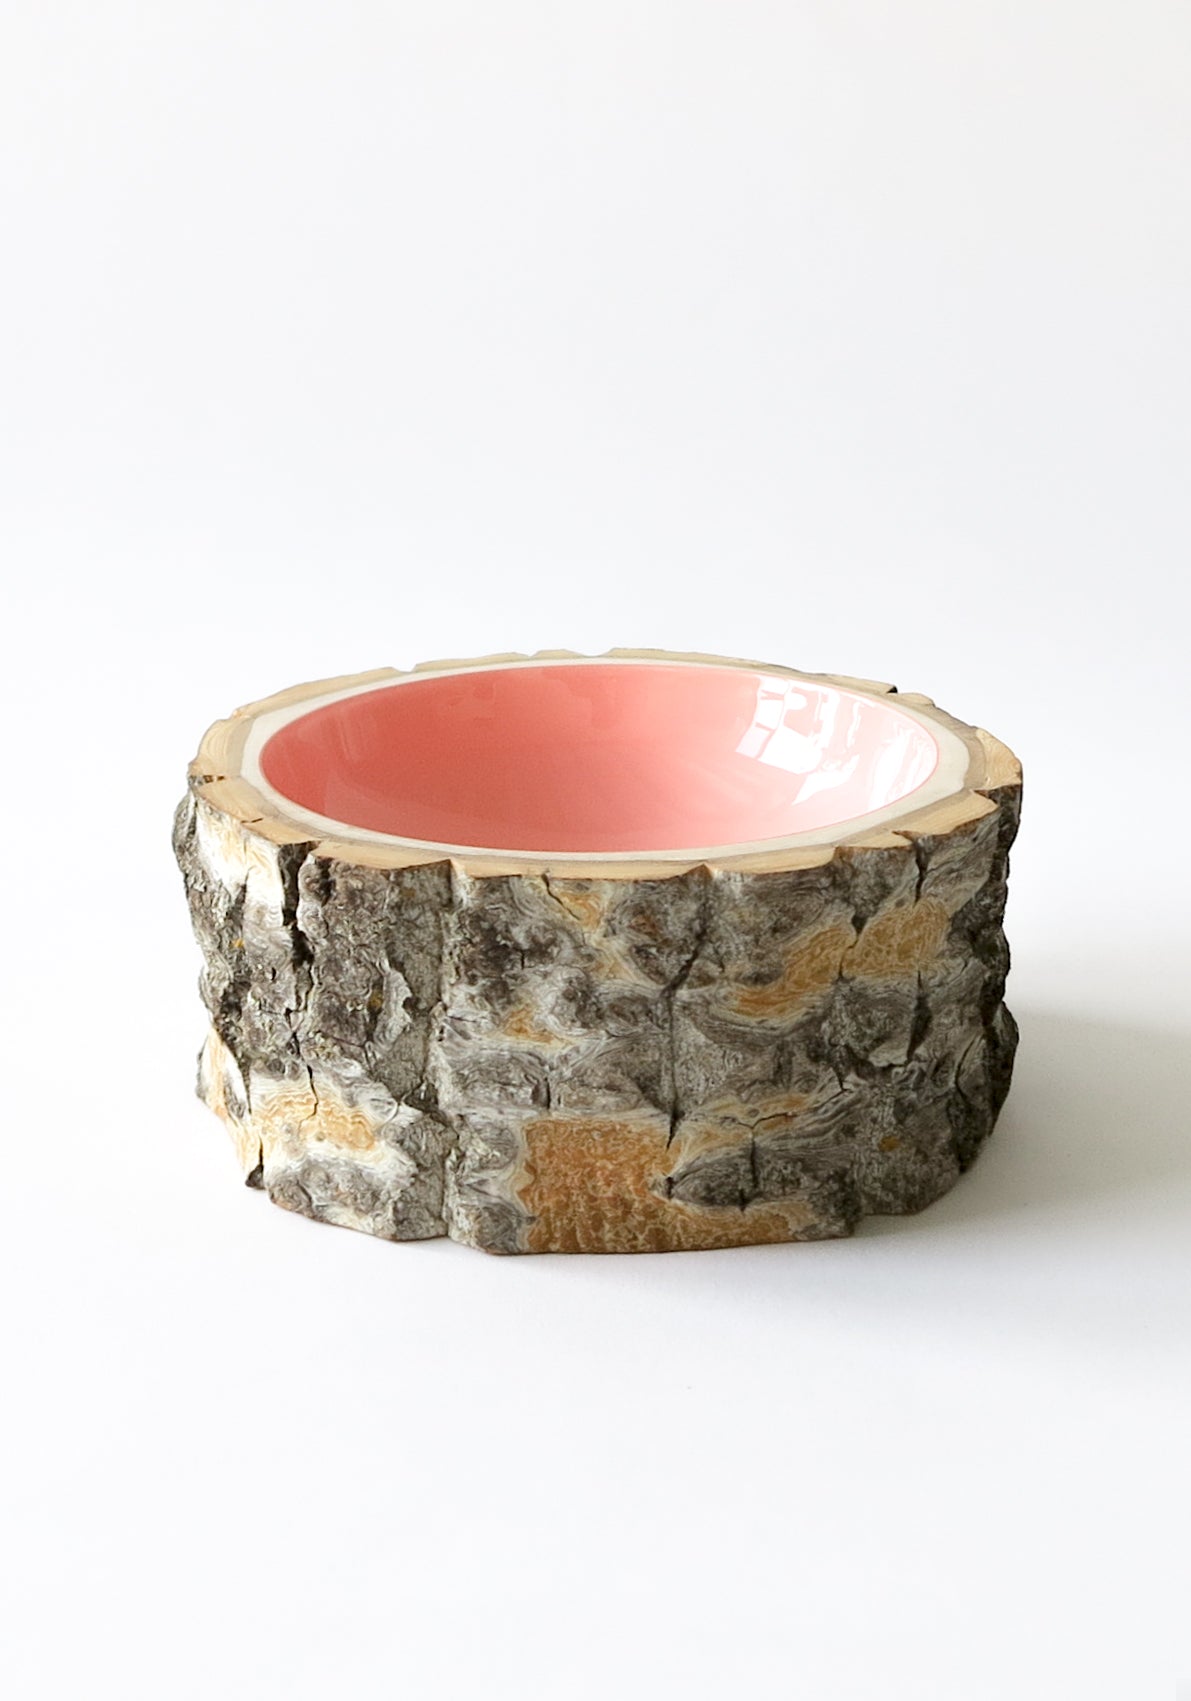 Size 7 Log Bowl - Medium to large wooden bowl with chunky poplar bark, glossy interior is a warm bright pink colour.